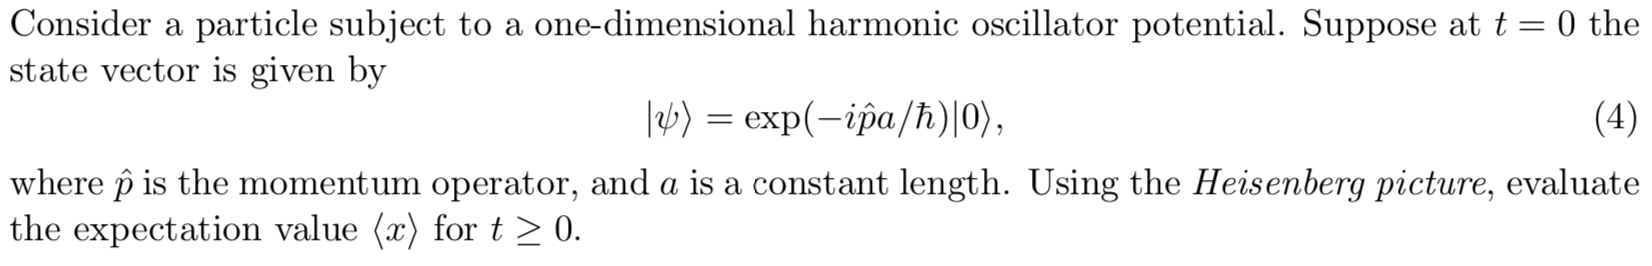 Consider a particle subject to a one-dimensional harmonic oscillator potential. Suppose at t = 0 the
state vector is given by
lb)=exp-ipa/h) 0),
(4)
where p is the momentum operator, and a is a constant length. Using the Heisenberg picture, evaluate
the expectation value (x) for t > 0.
